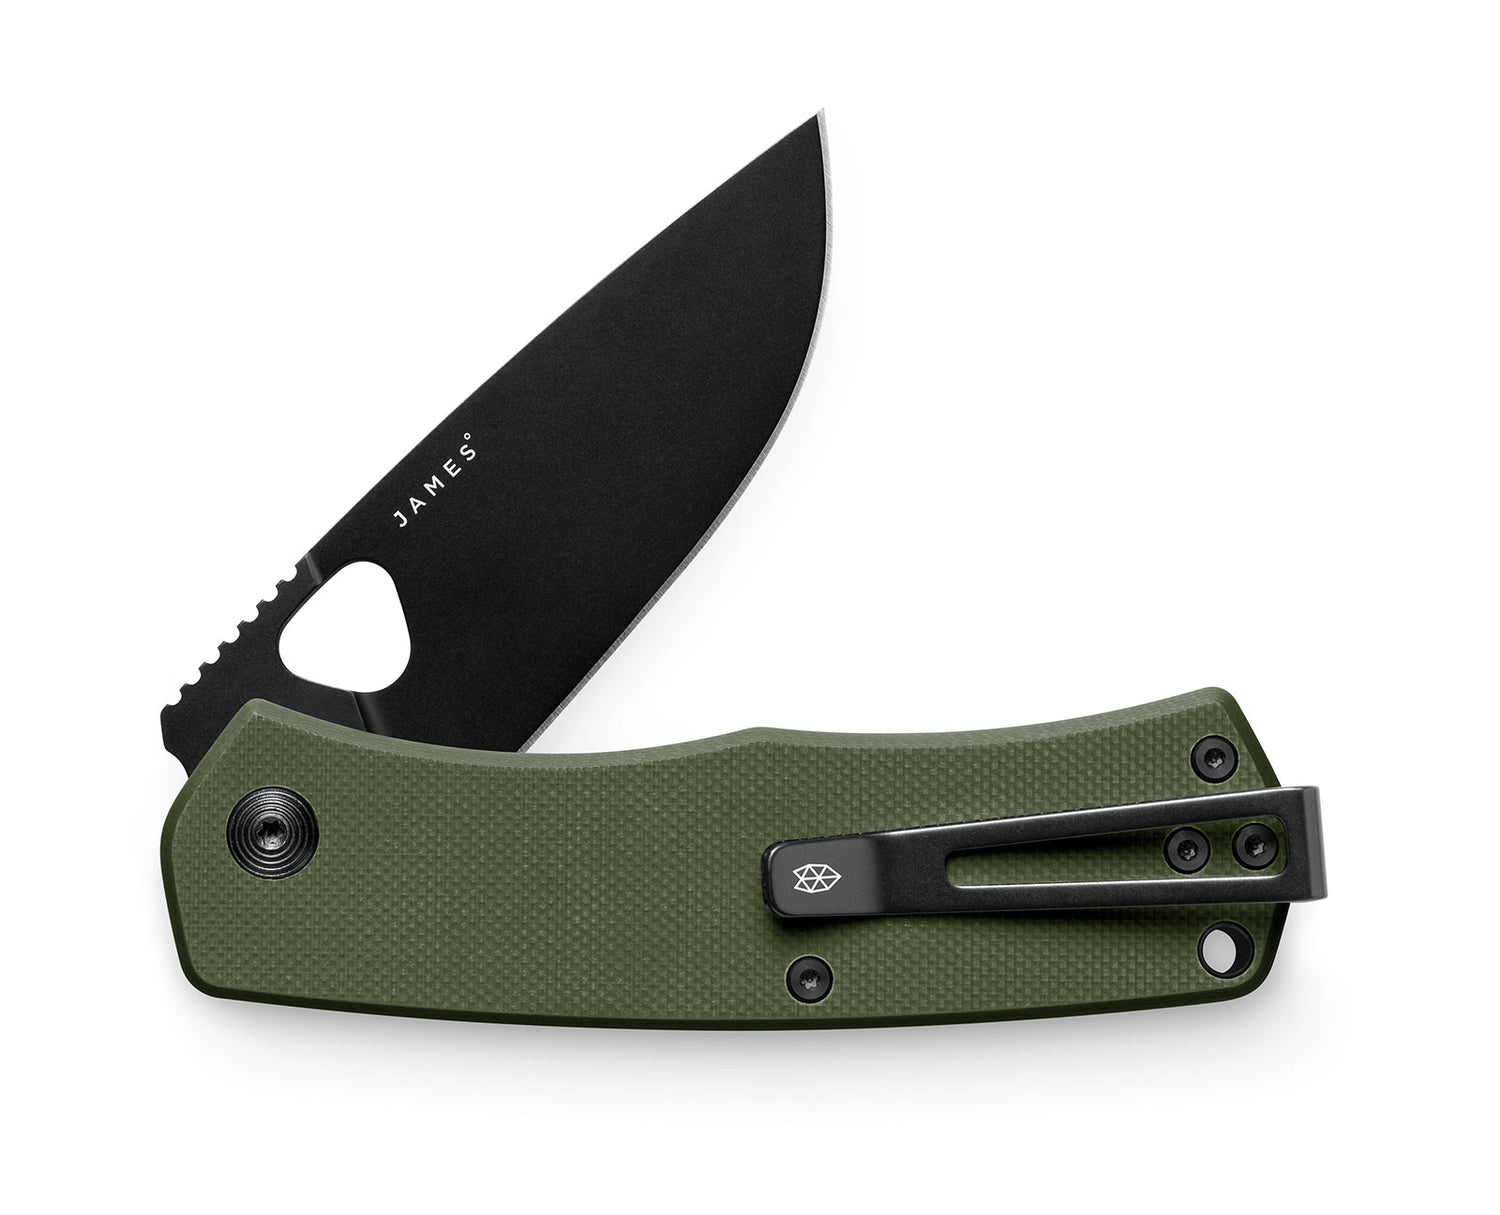 The Folsom knife with OD green handle and black blade.